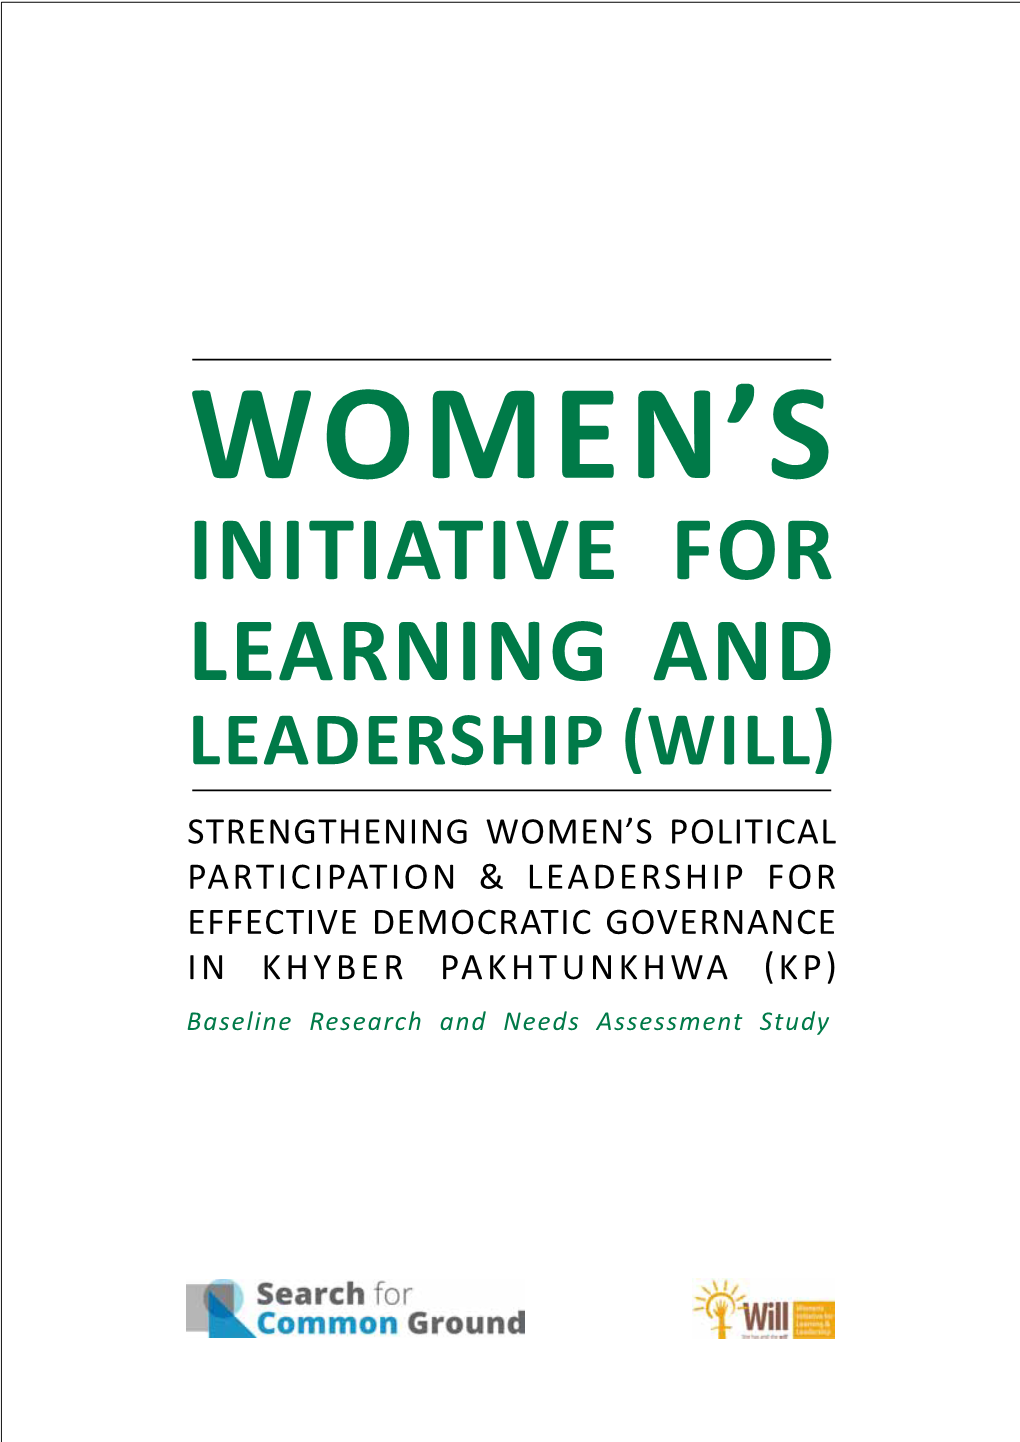 Women's Initiative for Learning and Leadership (WILL)